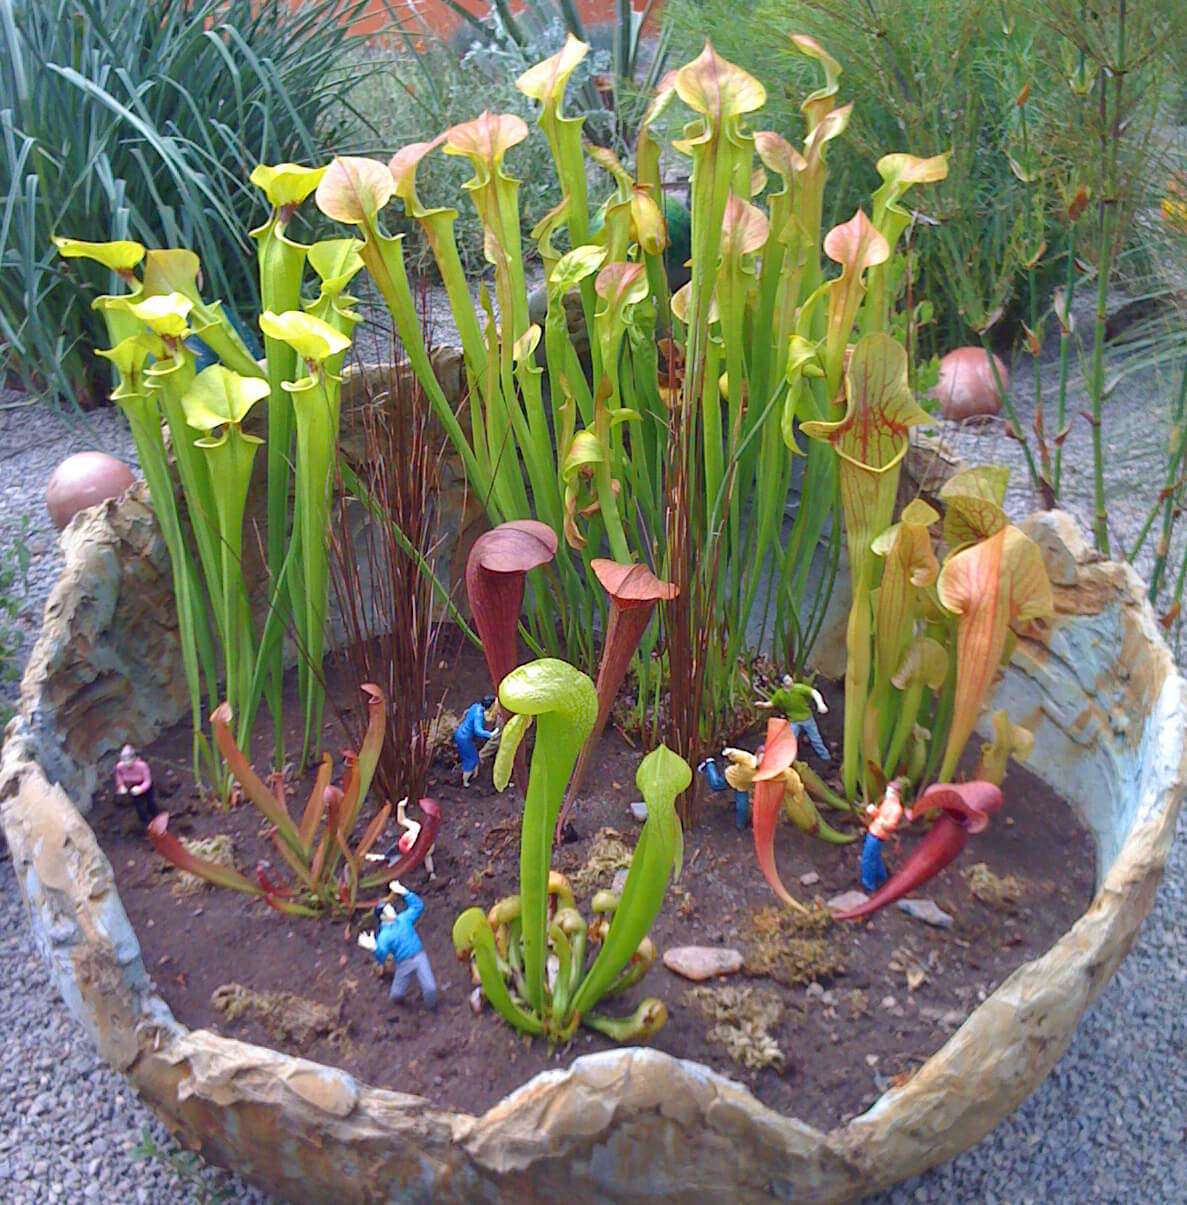 A pitcher plant bog container complete with crazy characters.